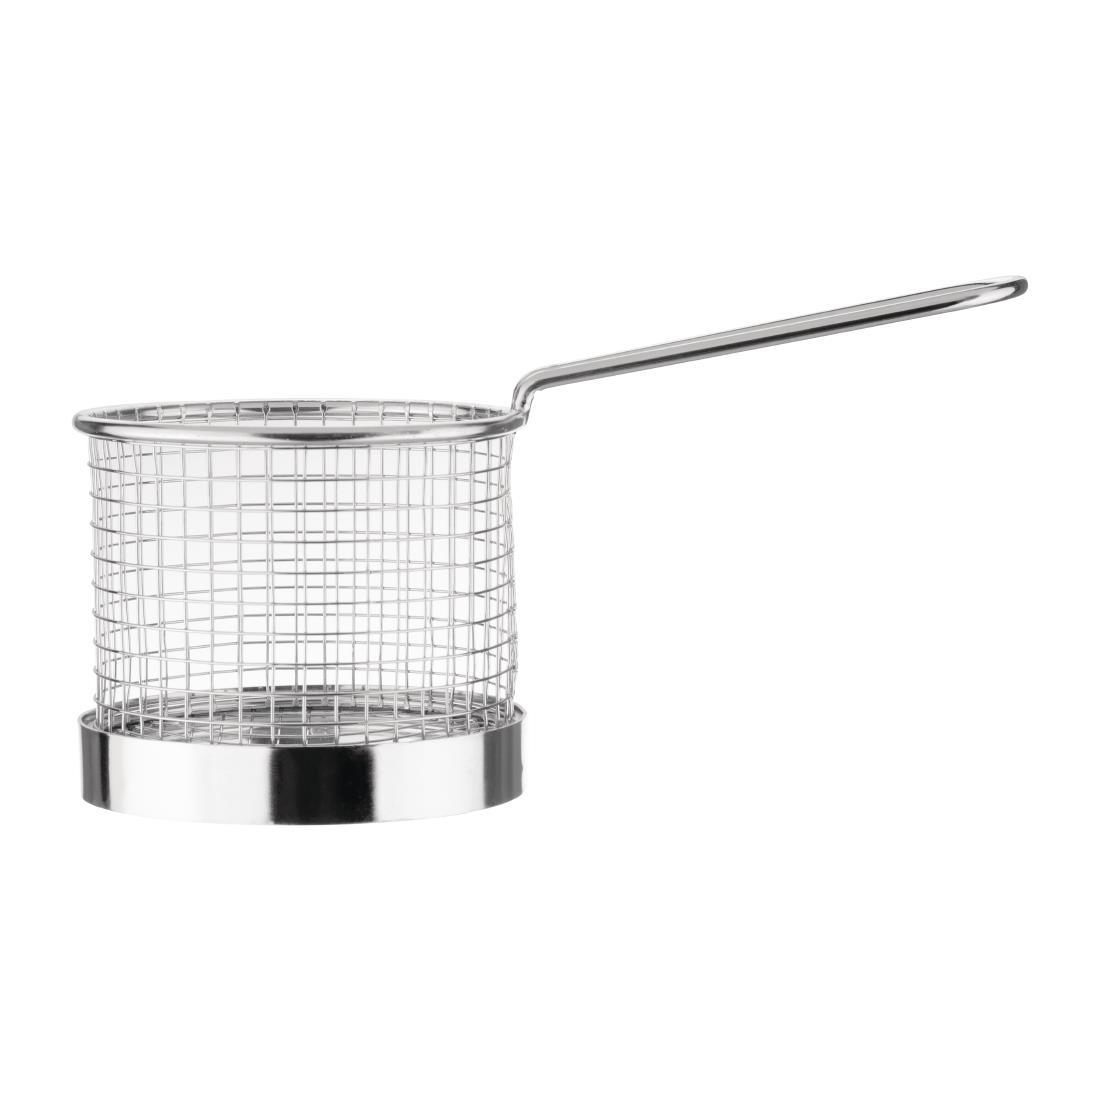 Olympia Chip Basket round with Handle 95mm - GG875  - 2